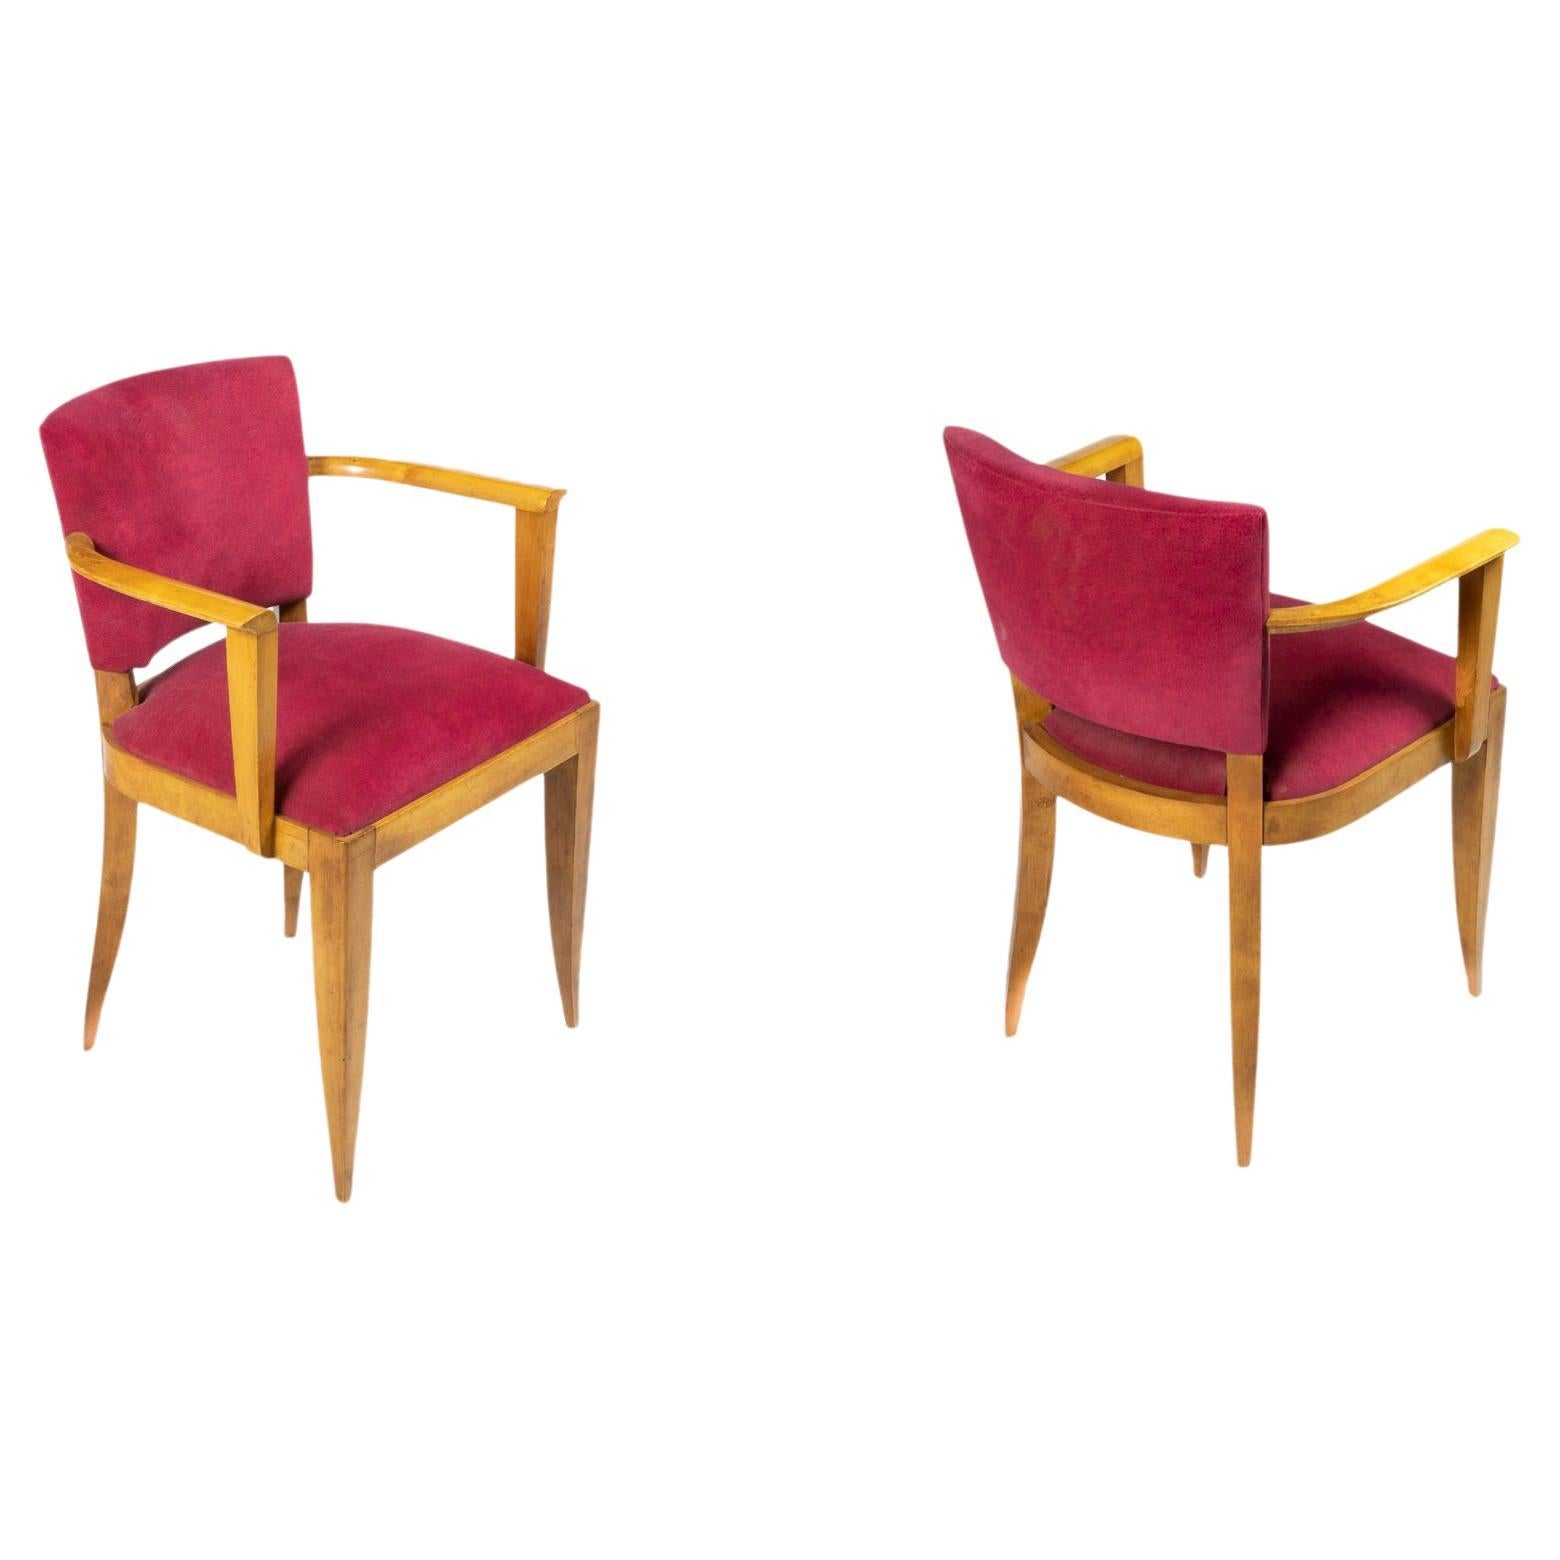 Set of 2 French Pink Bridge Chairs, 1940s  For Sale